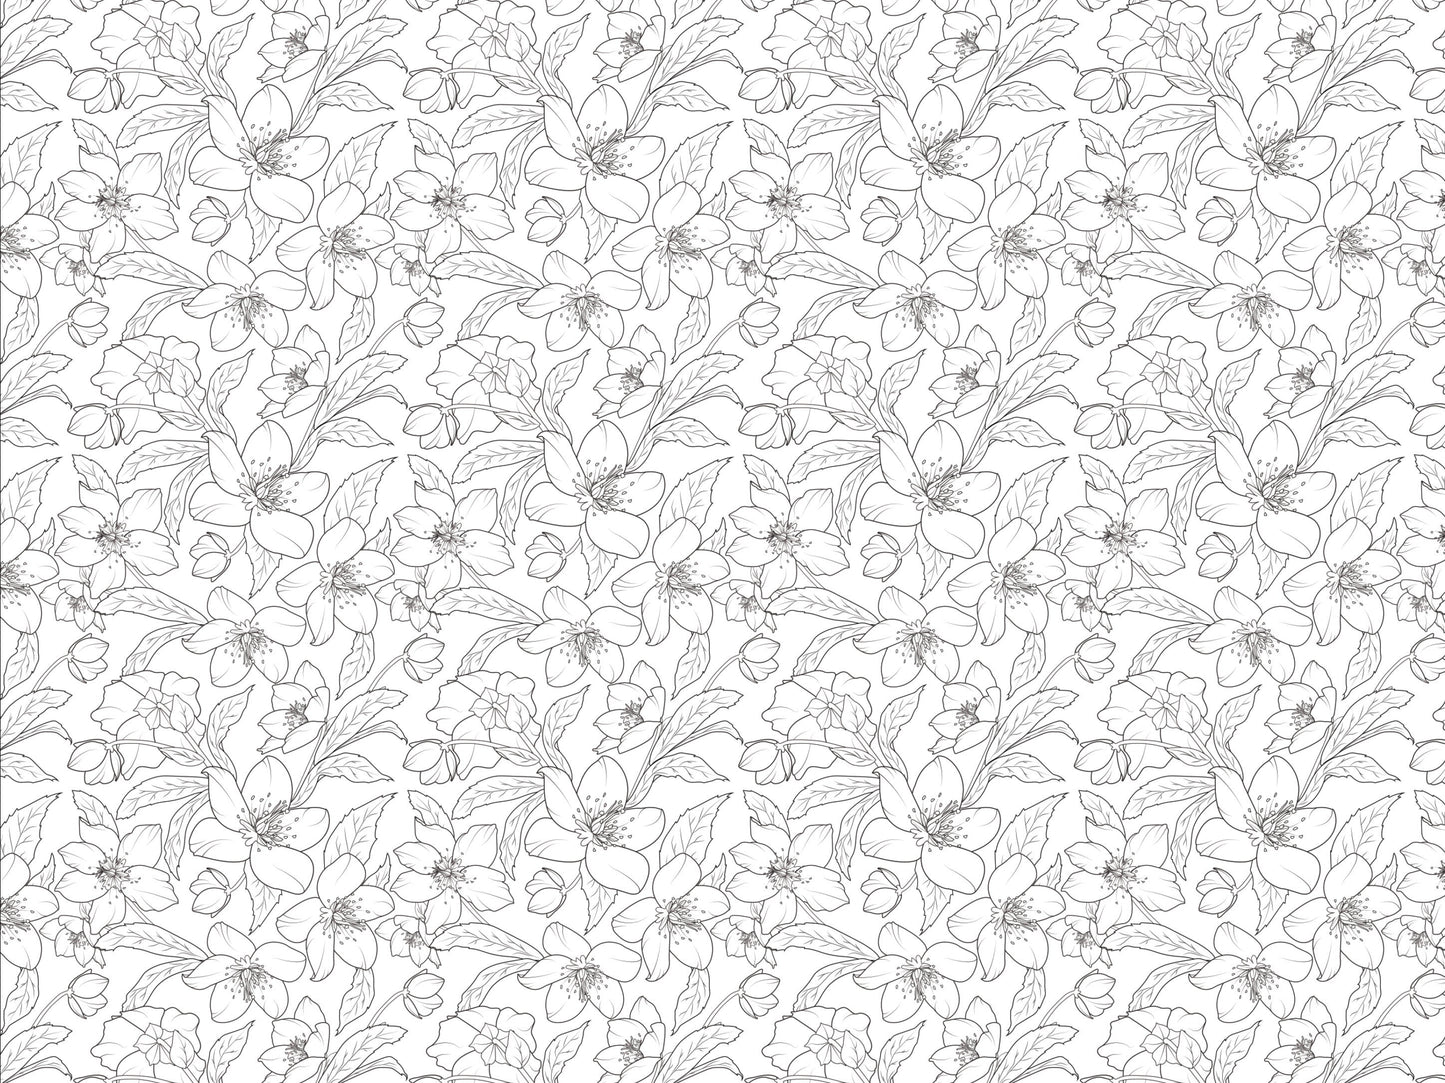 Wallpaper Floral Black White/ Winter Rose Black and White Wallpaper/Flower/ Botanical/ Removable/ Unpasted Pre-Pasted Wallpaper WW2015